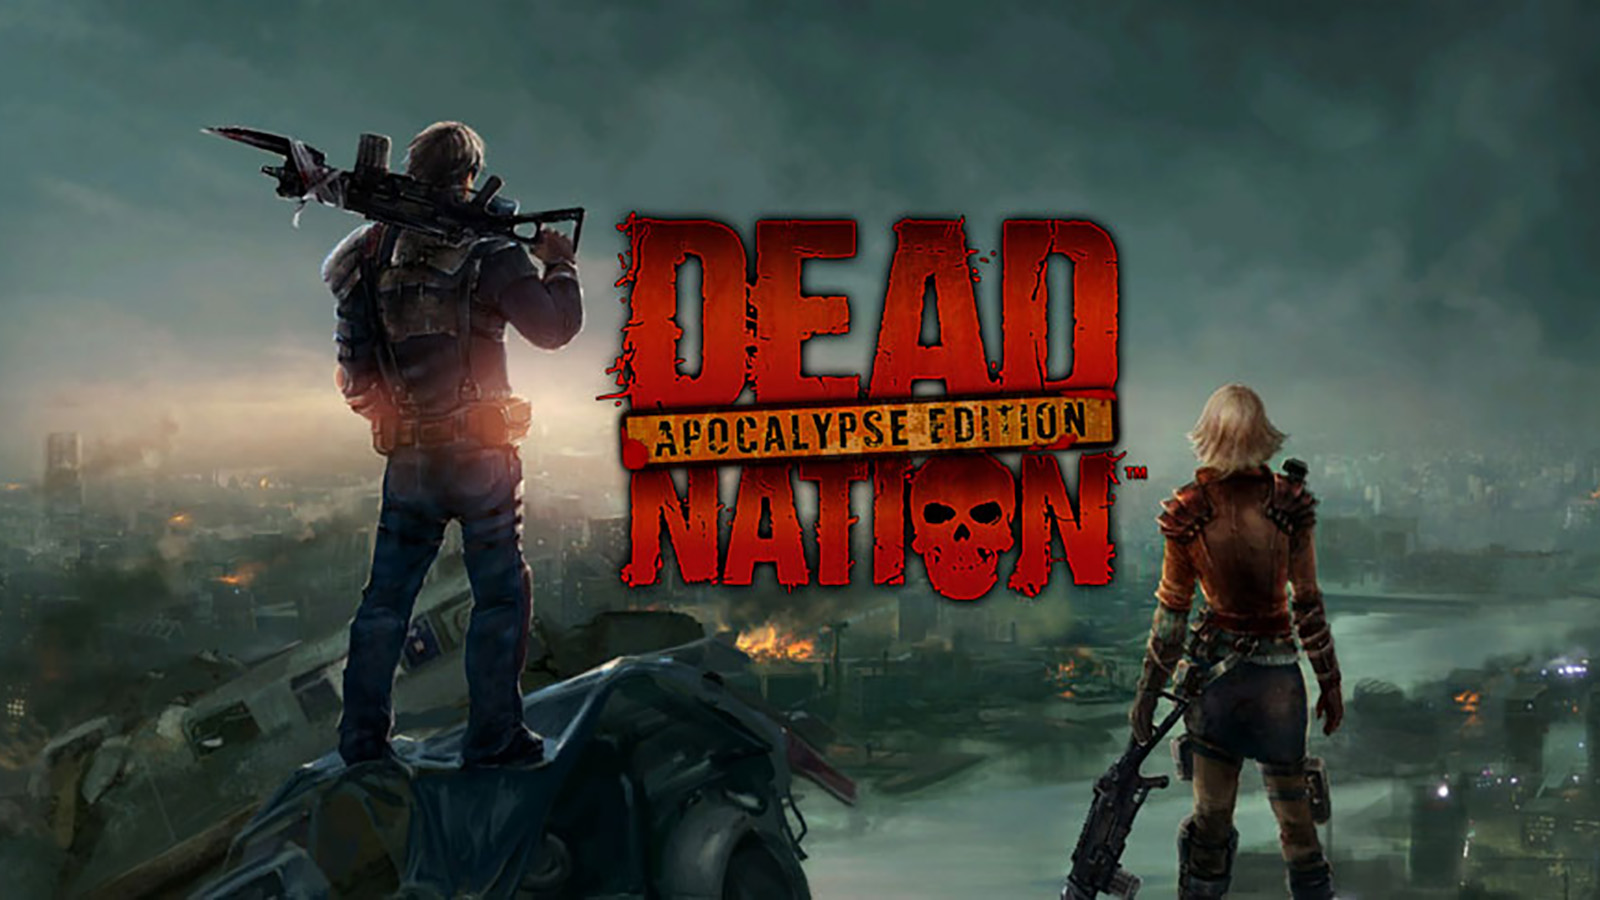 Dead Nation Dead-nation-apocalypse-edition-listing-thumb-01-ps4-us-09mar15?$Icon$